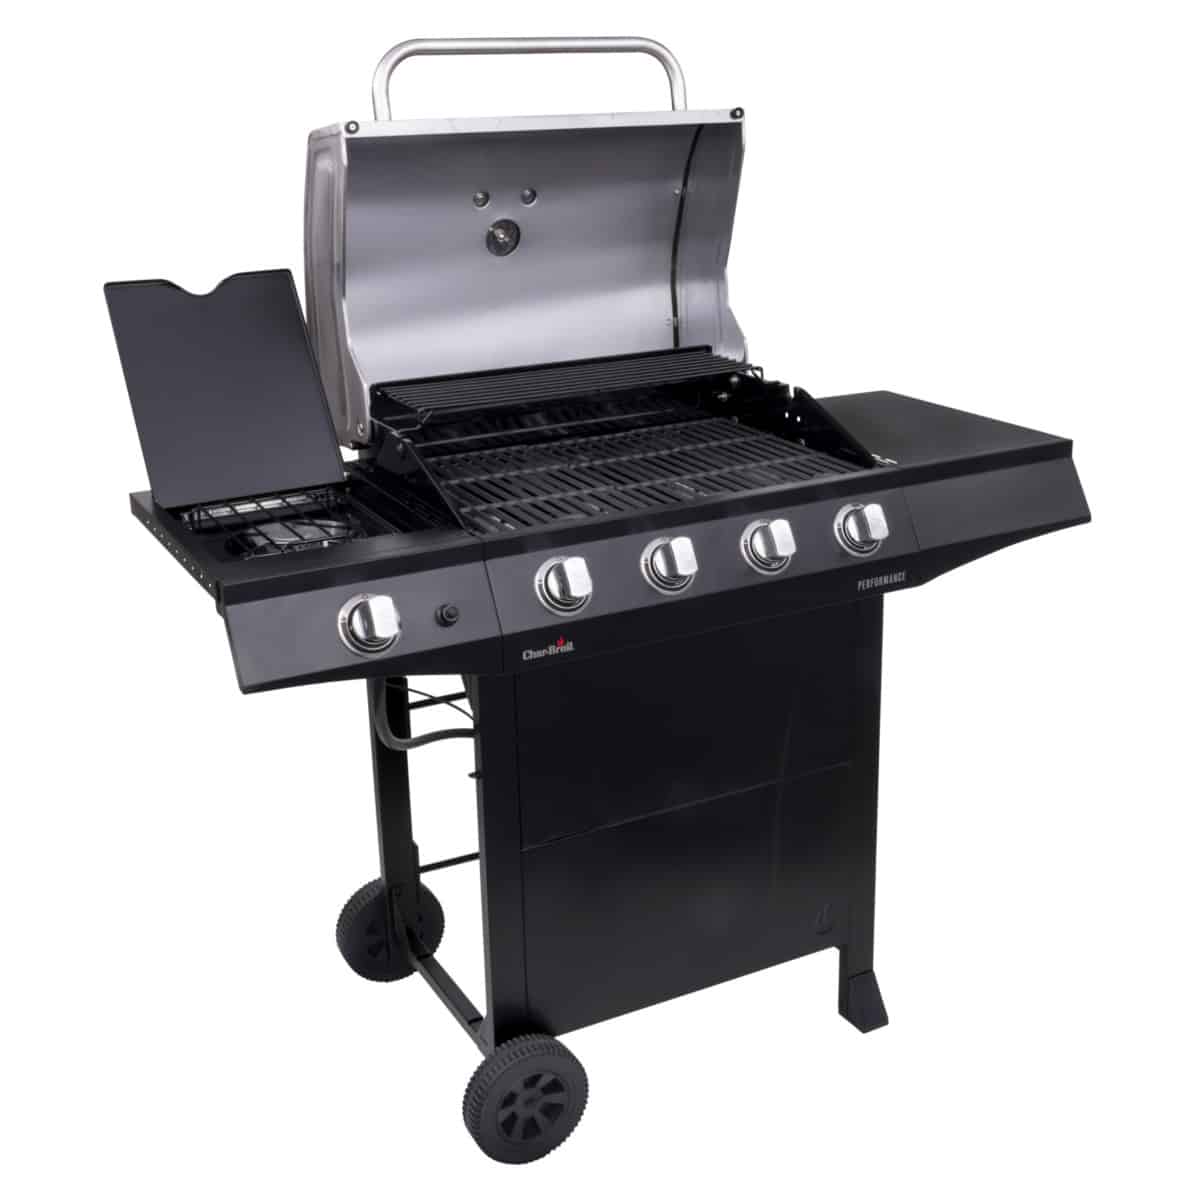 Char-Broil Performance 4-Burner gas grill, shot from the side with the lid open, isolated on white.